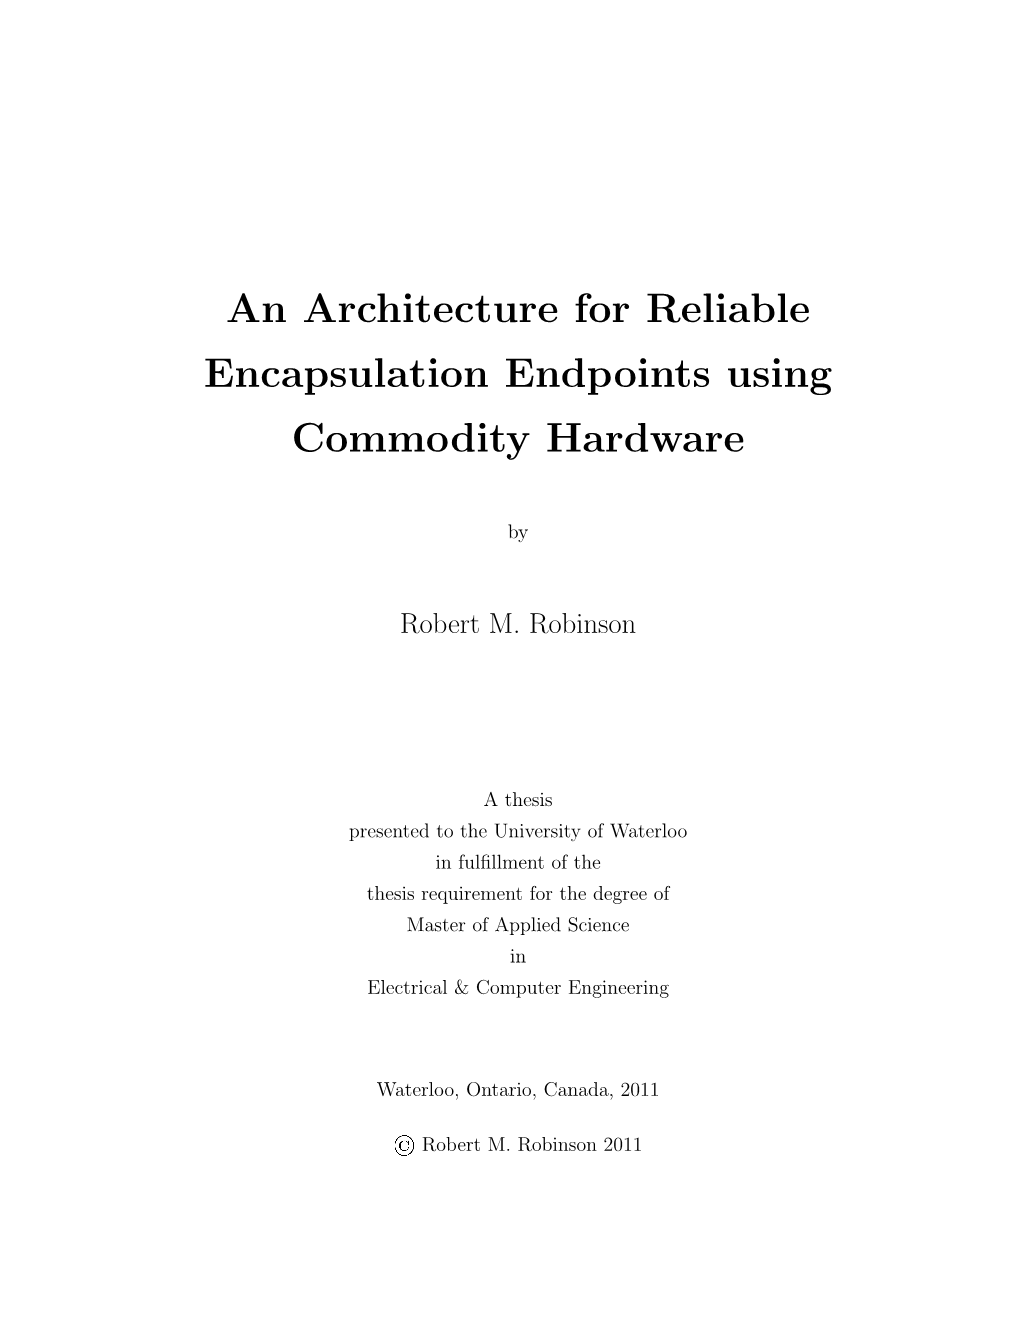 An Architecture for Reliable Encapsulation Endpoints Using Commodity Hardware